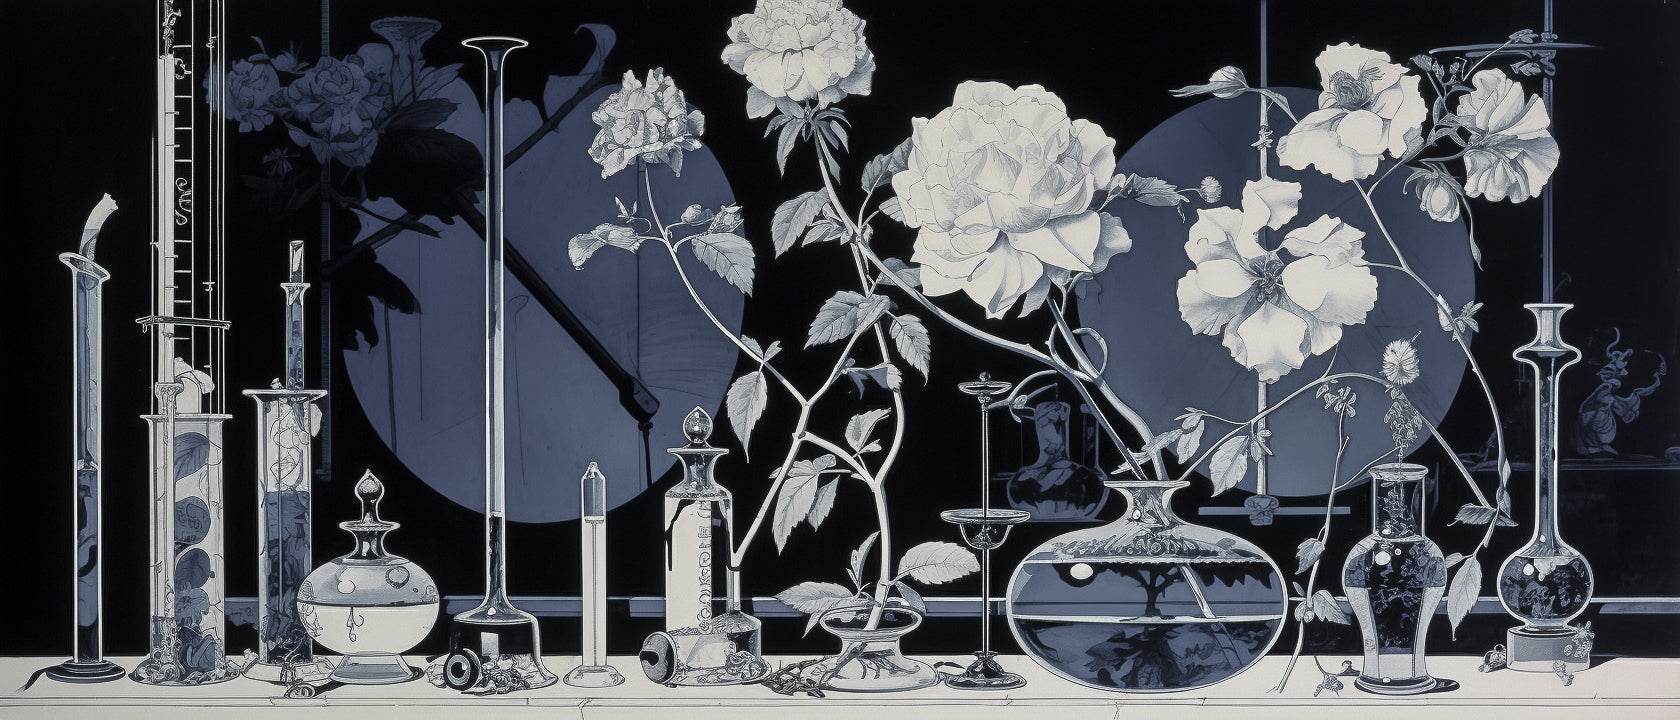 The Olfactory Science Behind Sustainable Perfumes: How Do They Affect Us?